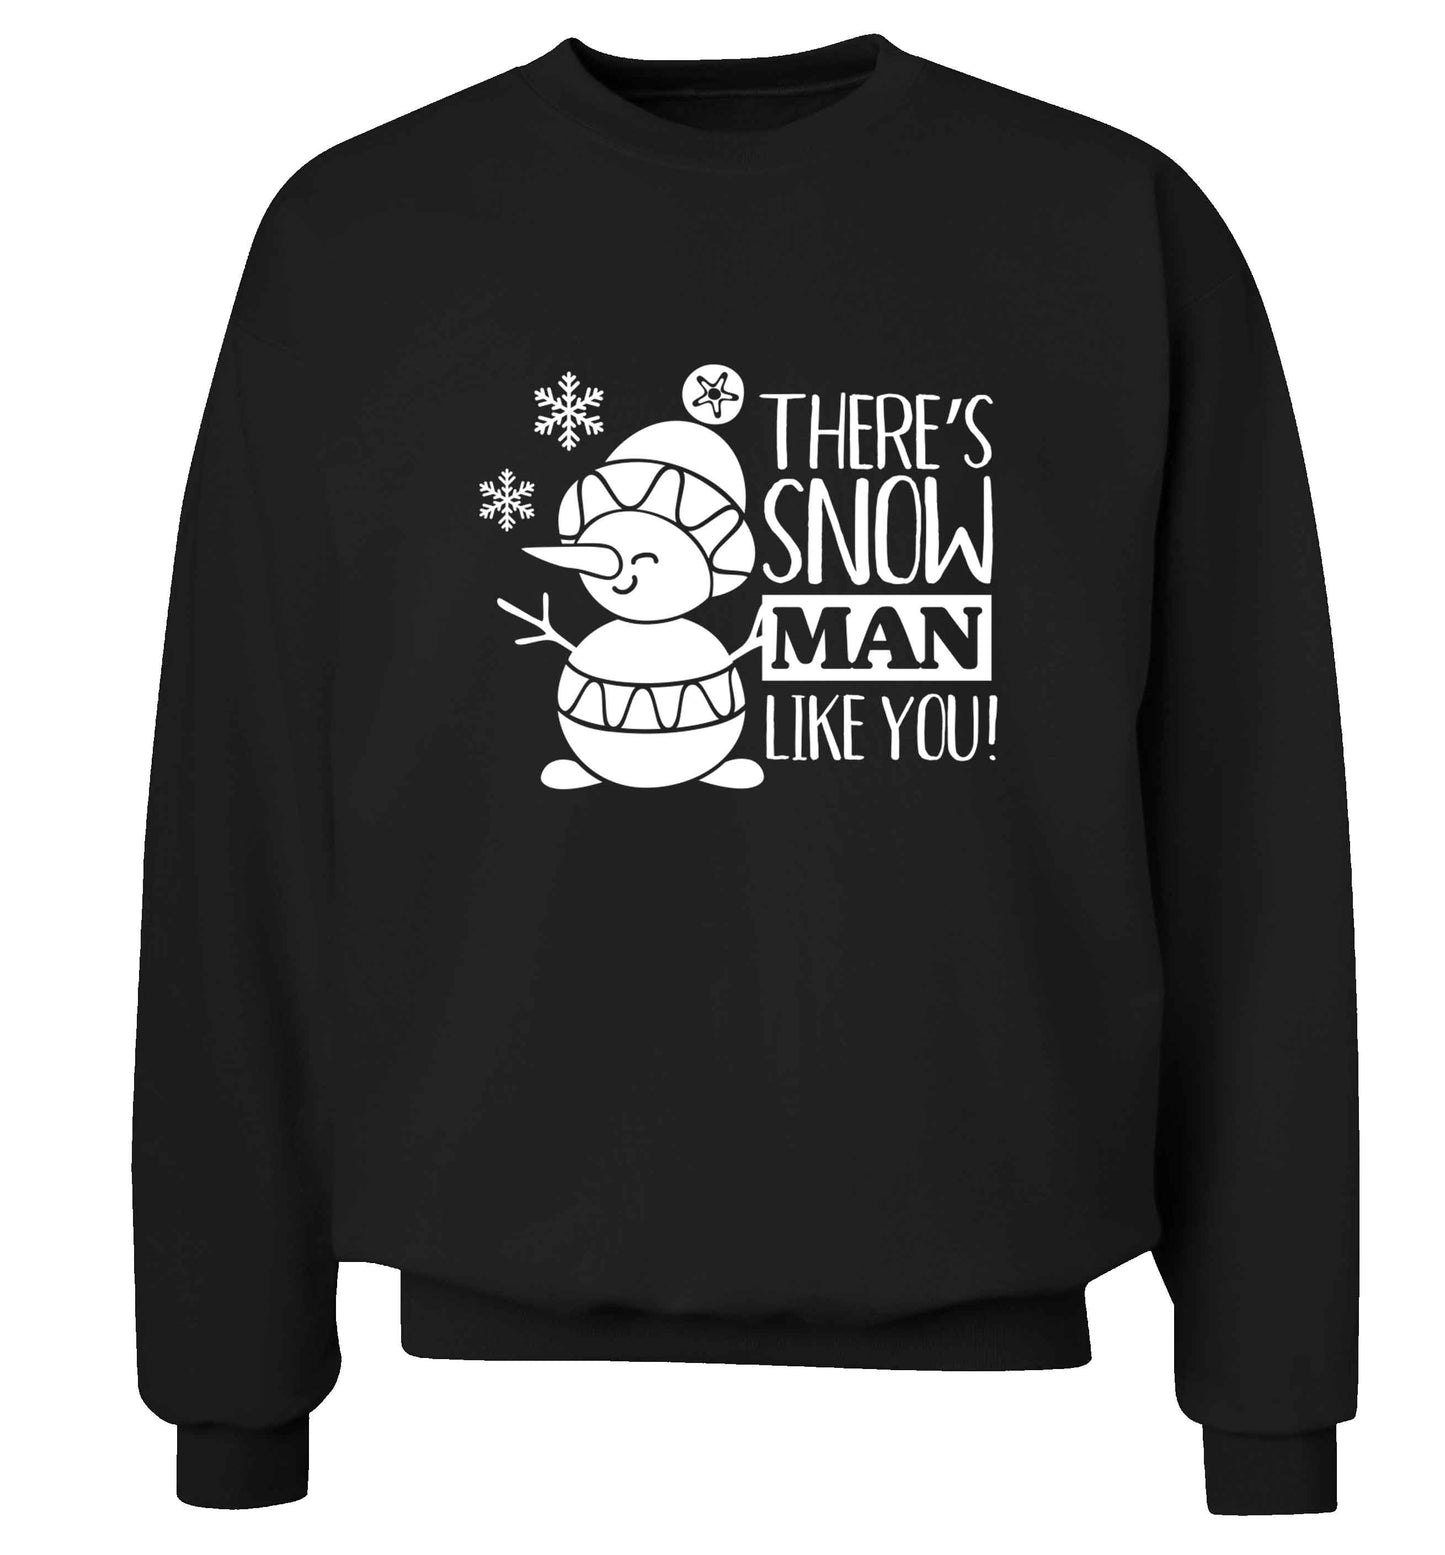 There's snow man like you adult's unisex black sweater 2XL